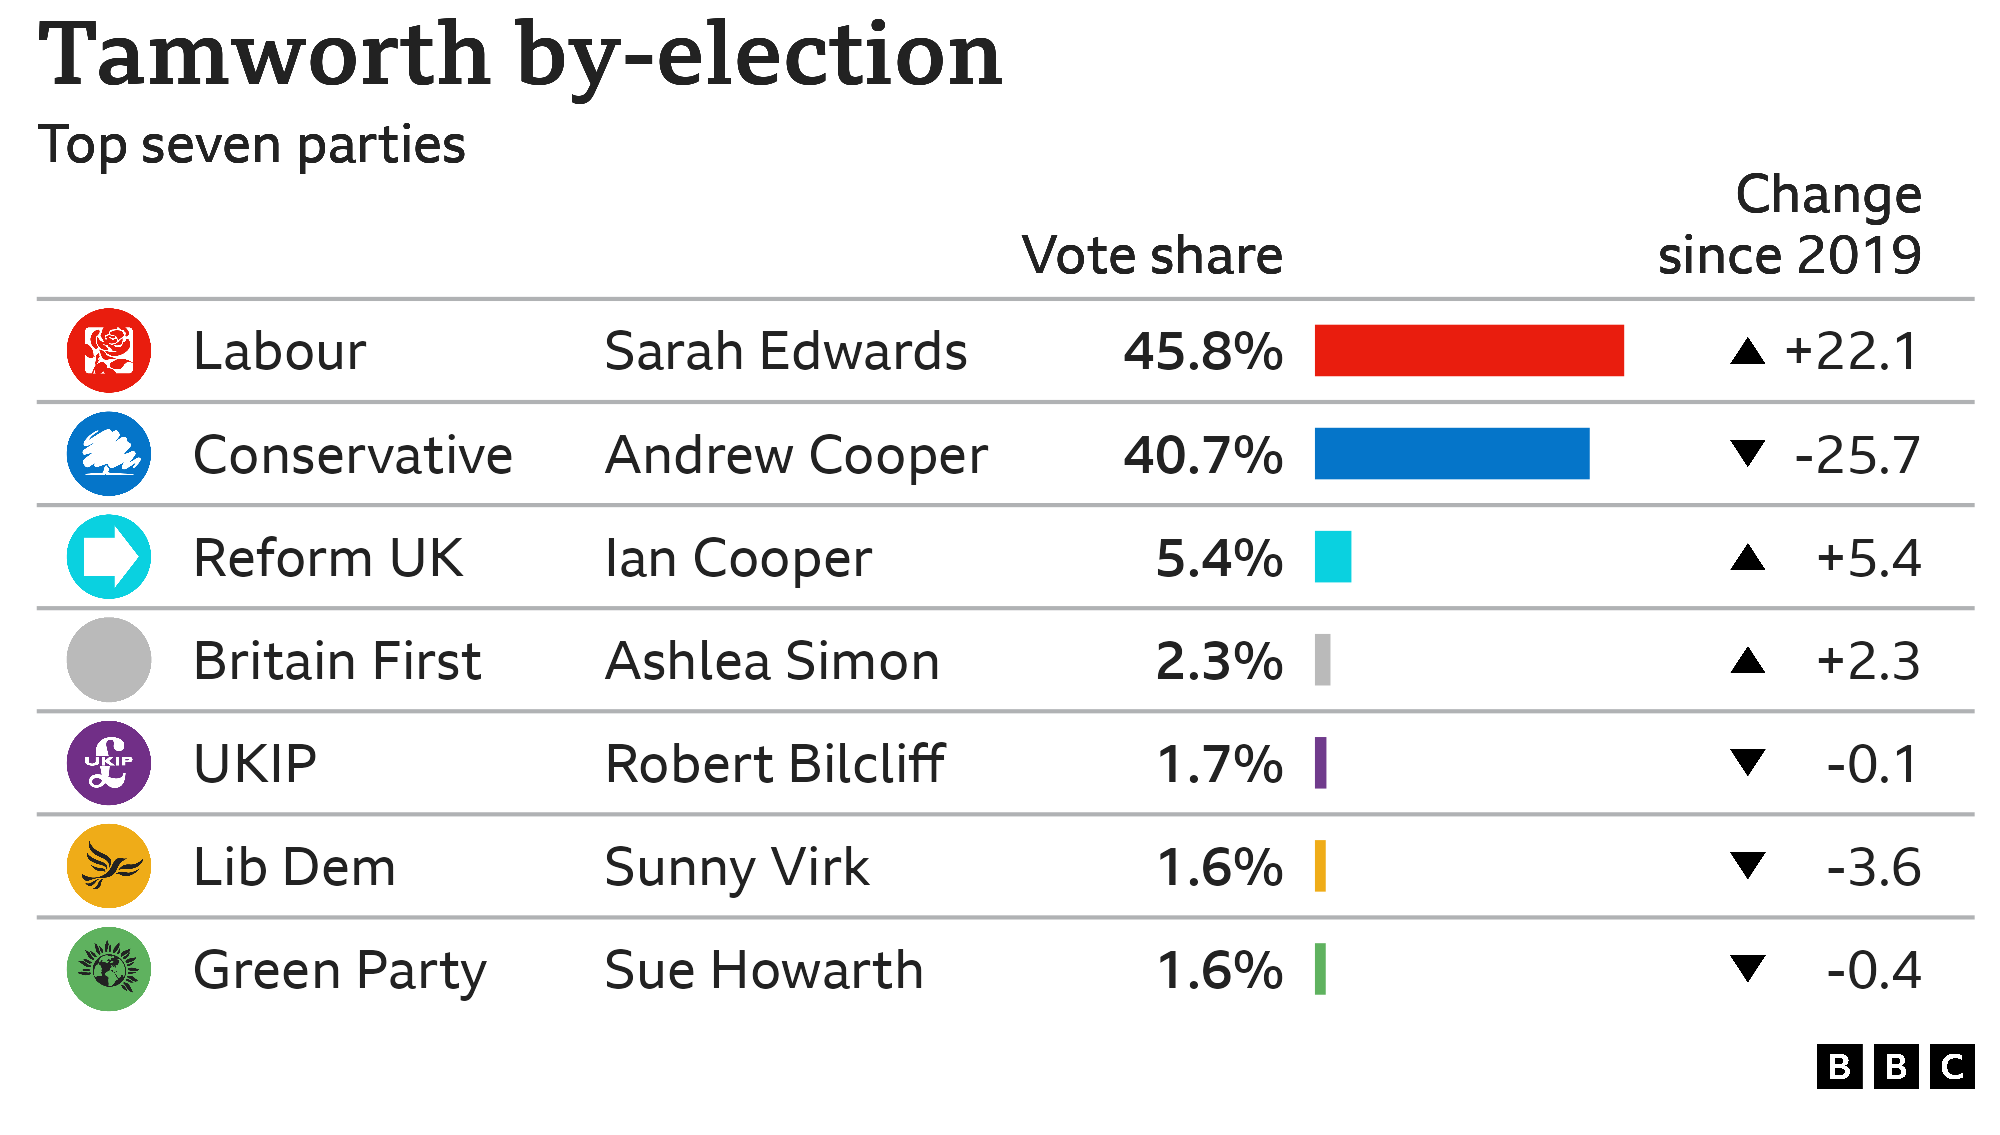 Tamworth by-election result graphic